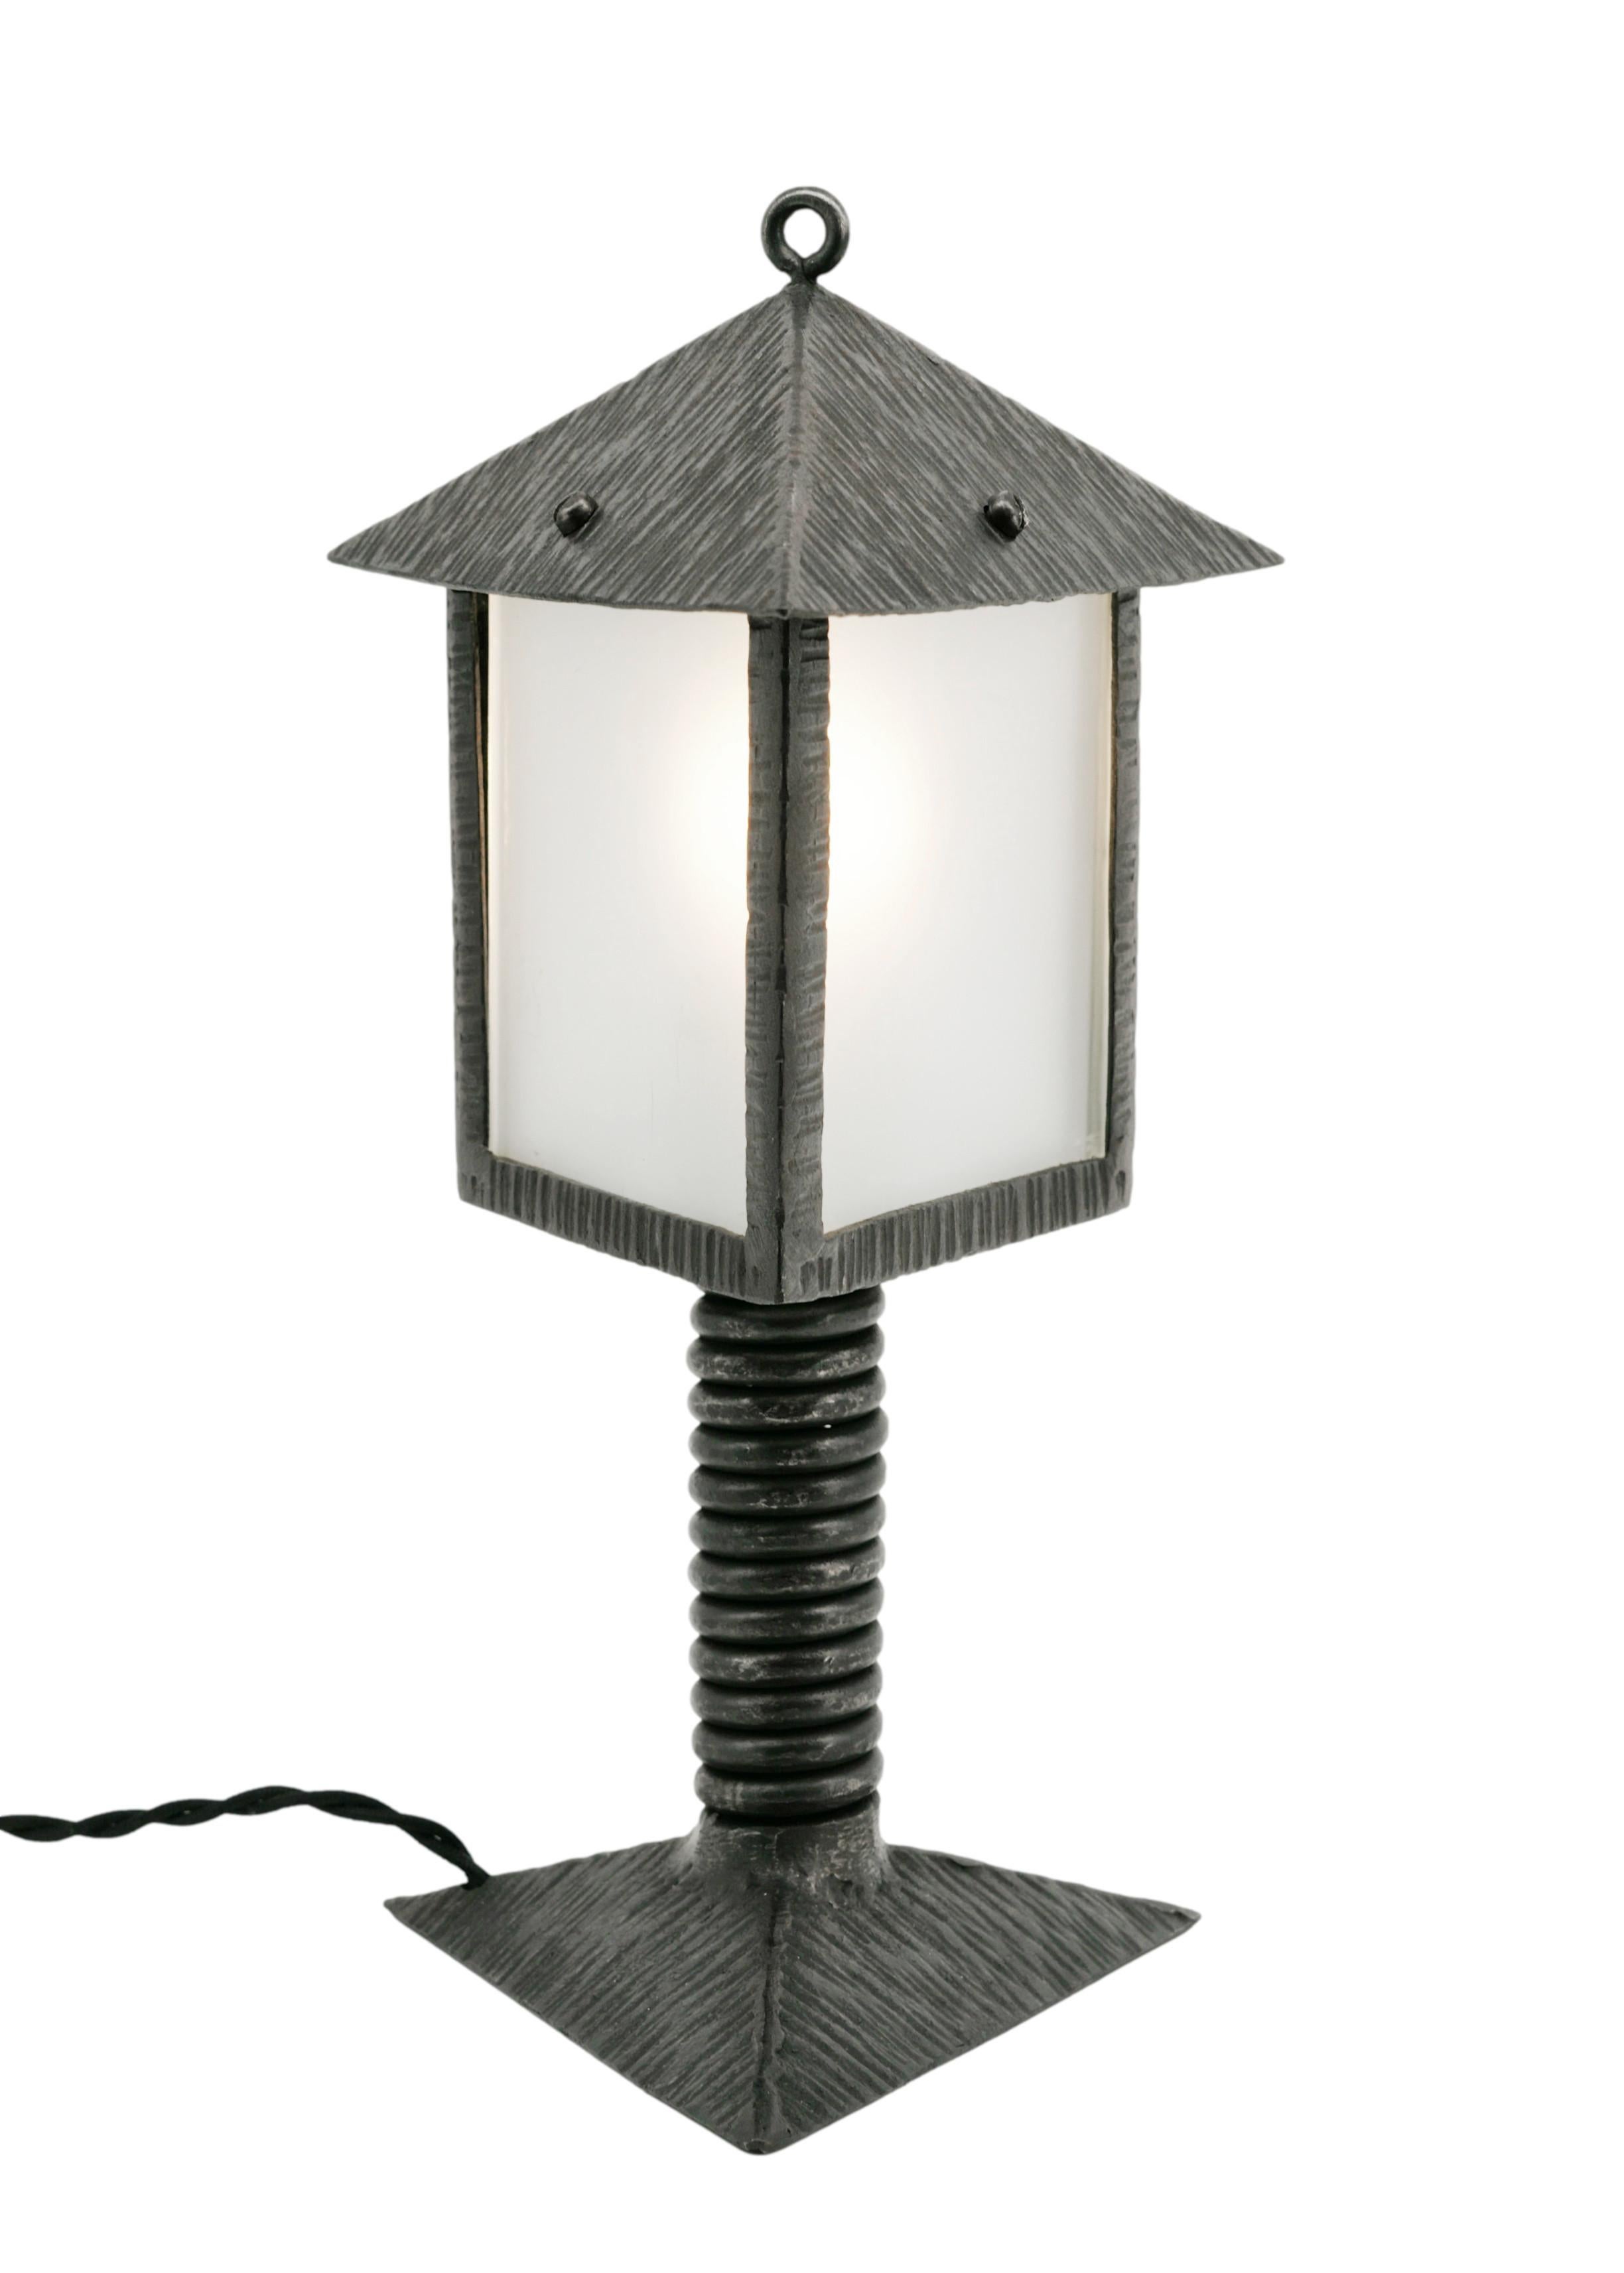 French Art Deco table lamp / lantern, France, 1920s. Can be used as a table lamp or lantern. Wrought-iron and glass. Height: 13